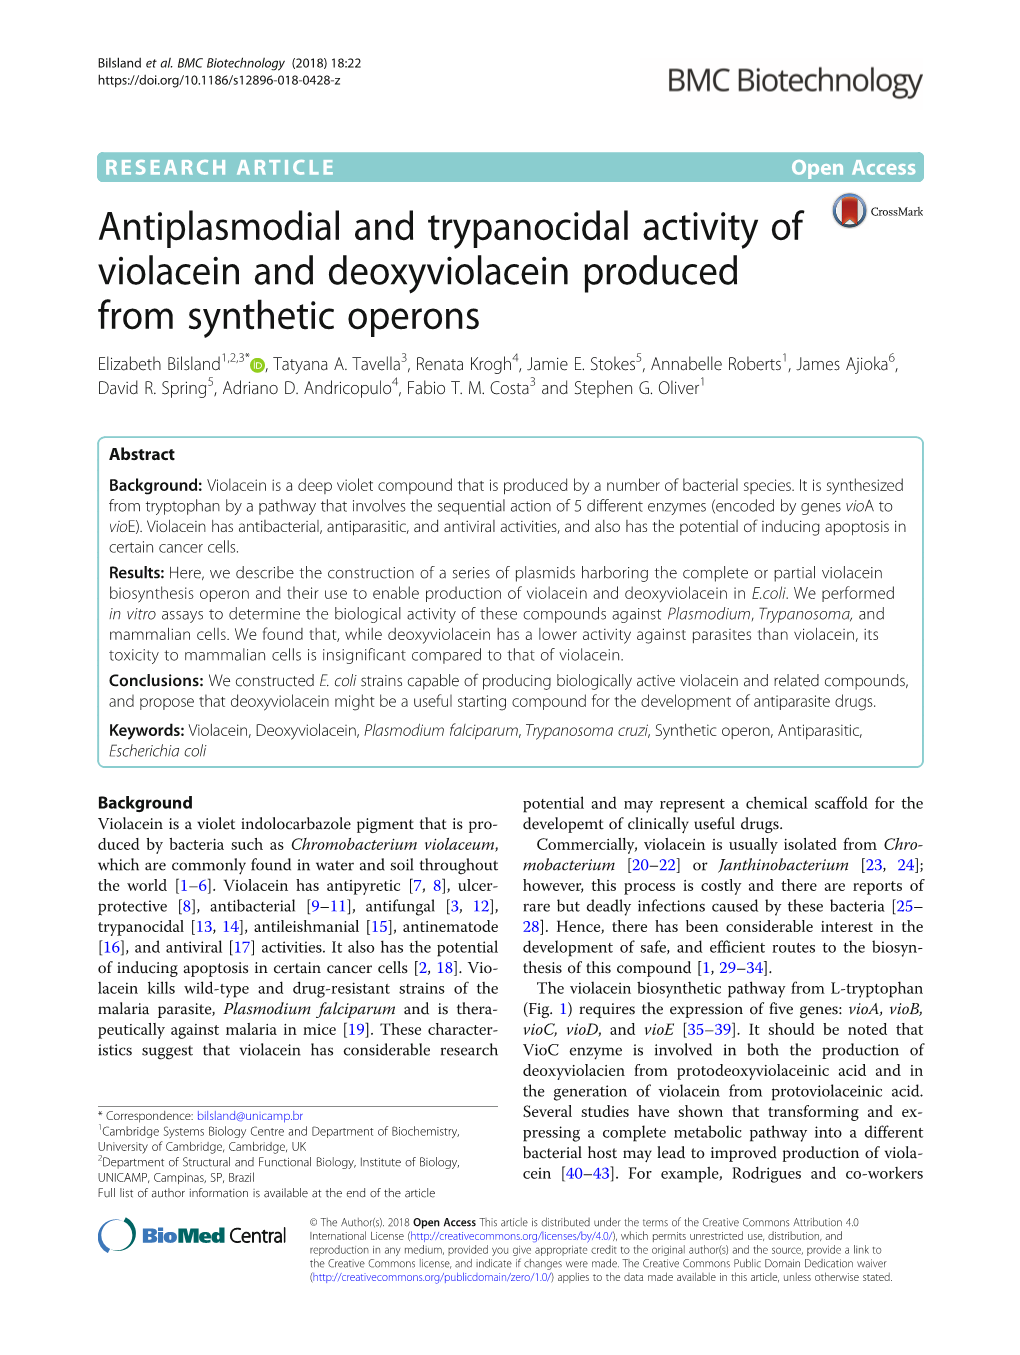 Antiplasmodial and Trypanocidal Activity of Violacein and Deoxyviolacein Produced from Synthetic Operons Elizabeth Bilsland1,2,3* , Tatyana A